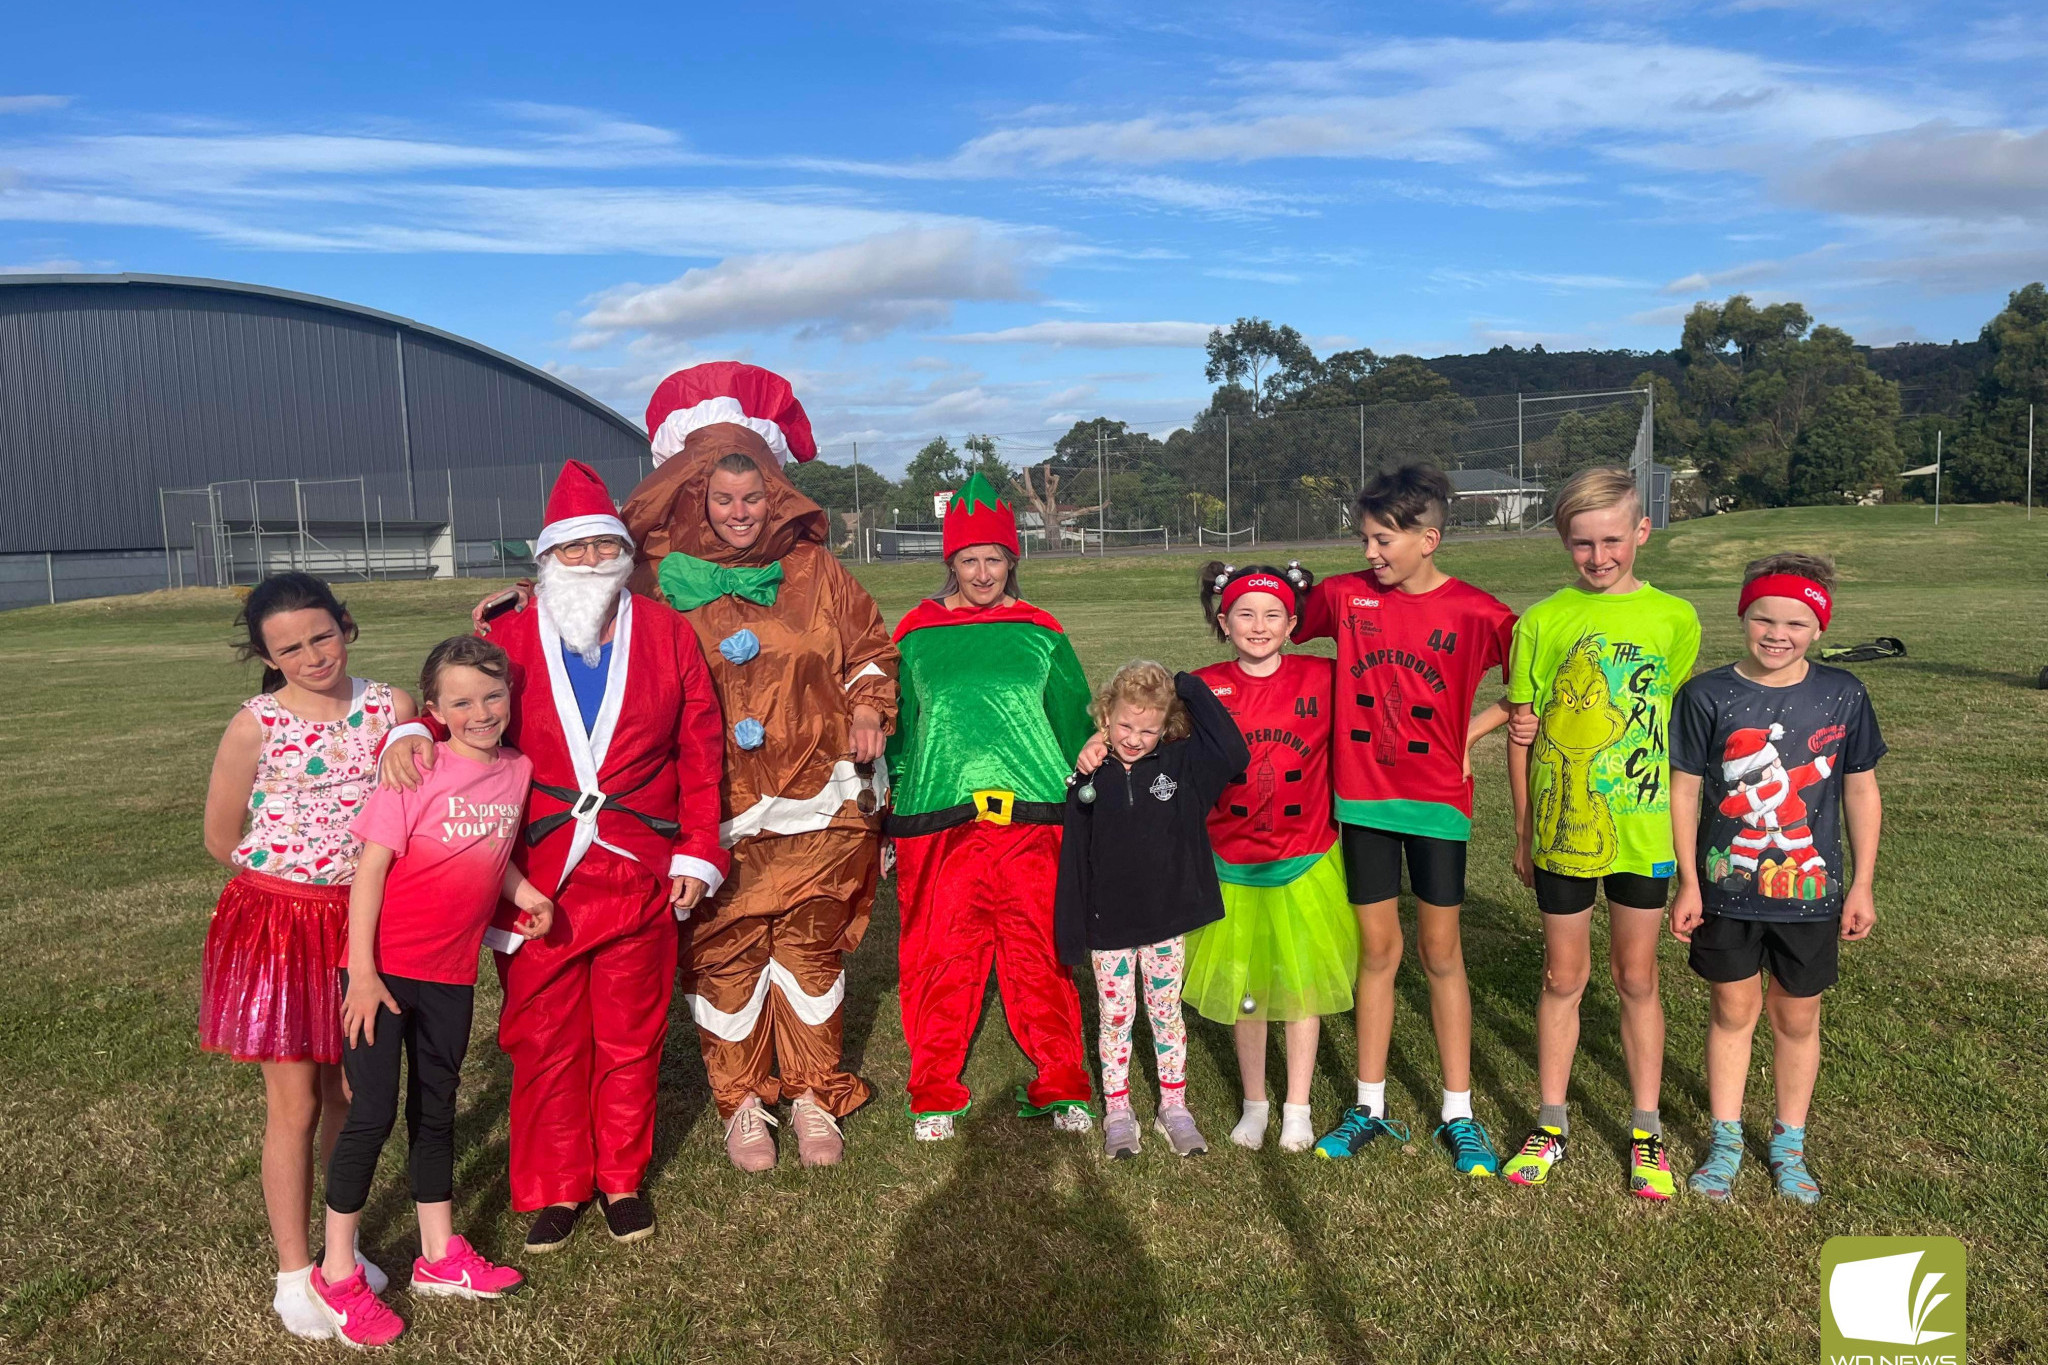 Festive fun at little aths - feature photo